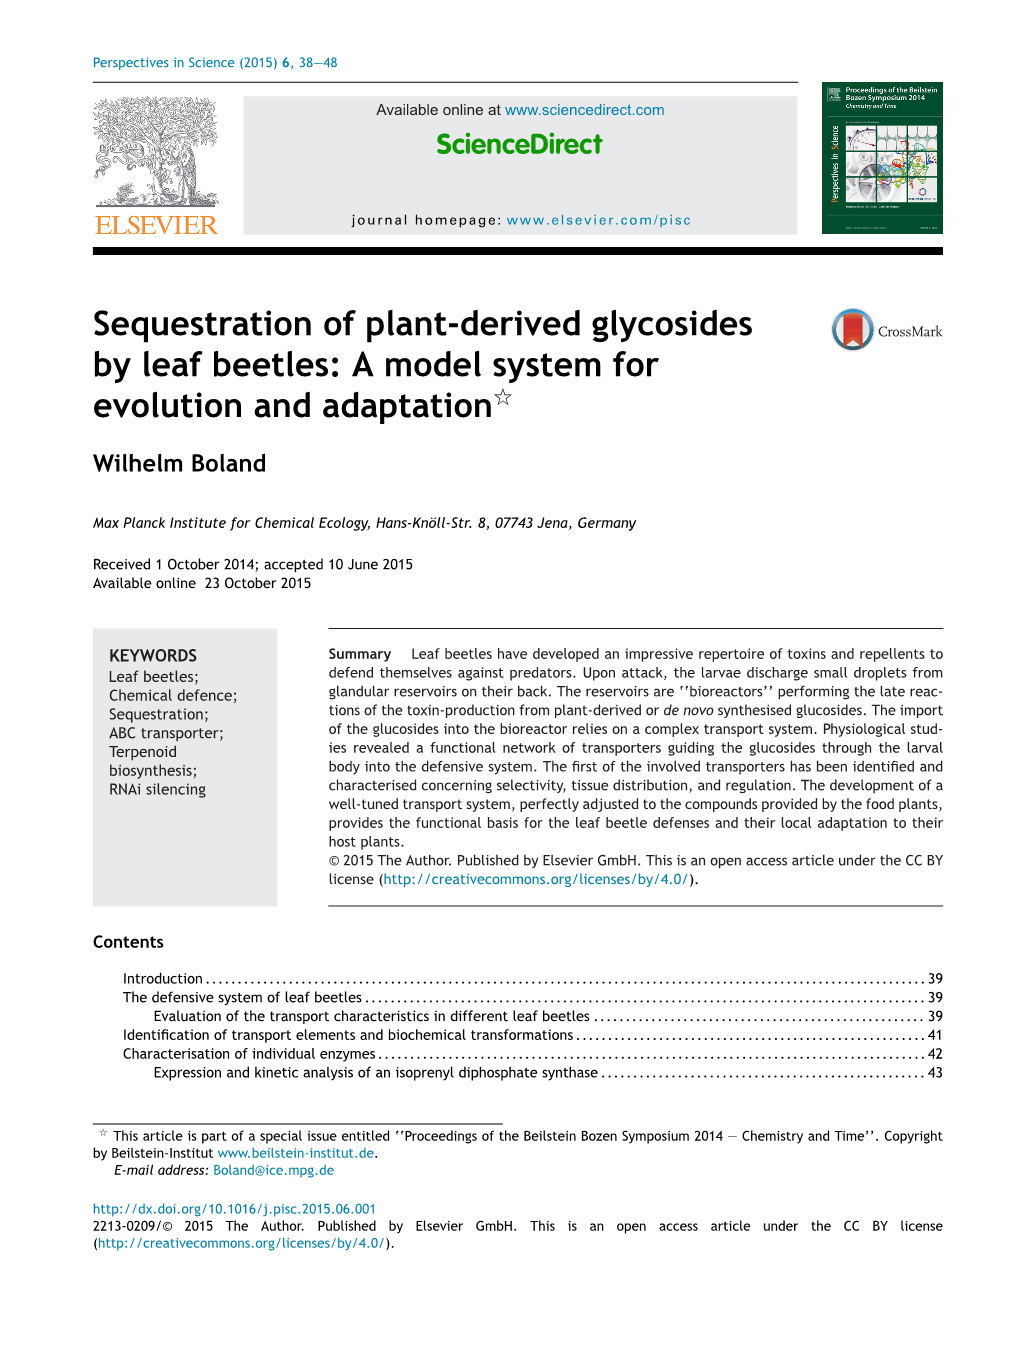 Sequestration of Plant-Derived Glycosides by Leaf Beetles 39